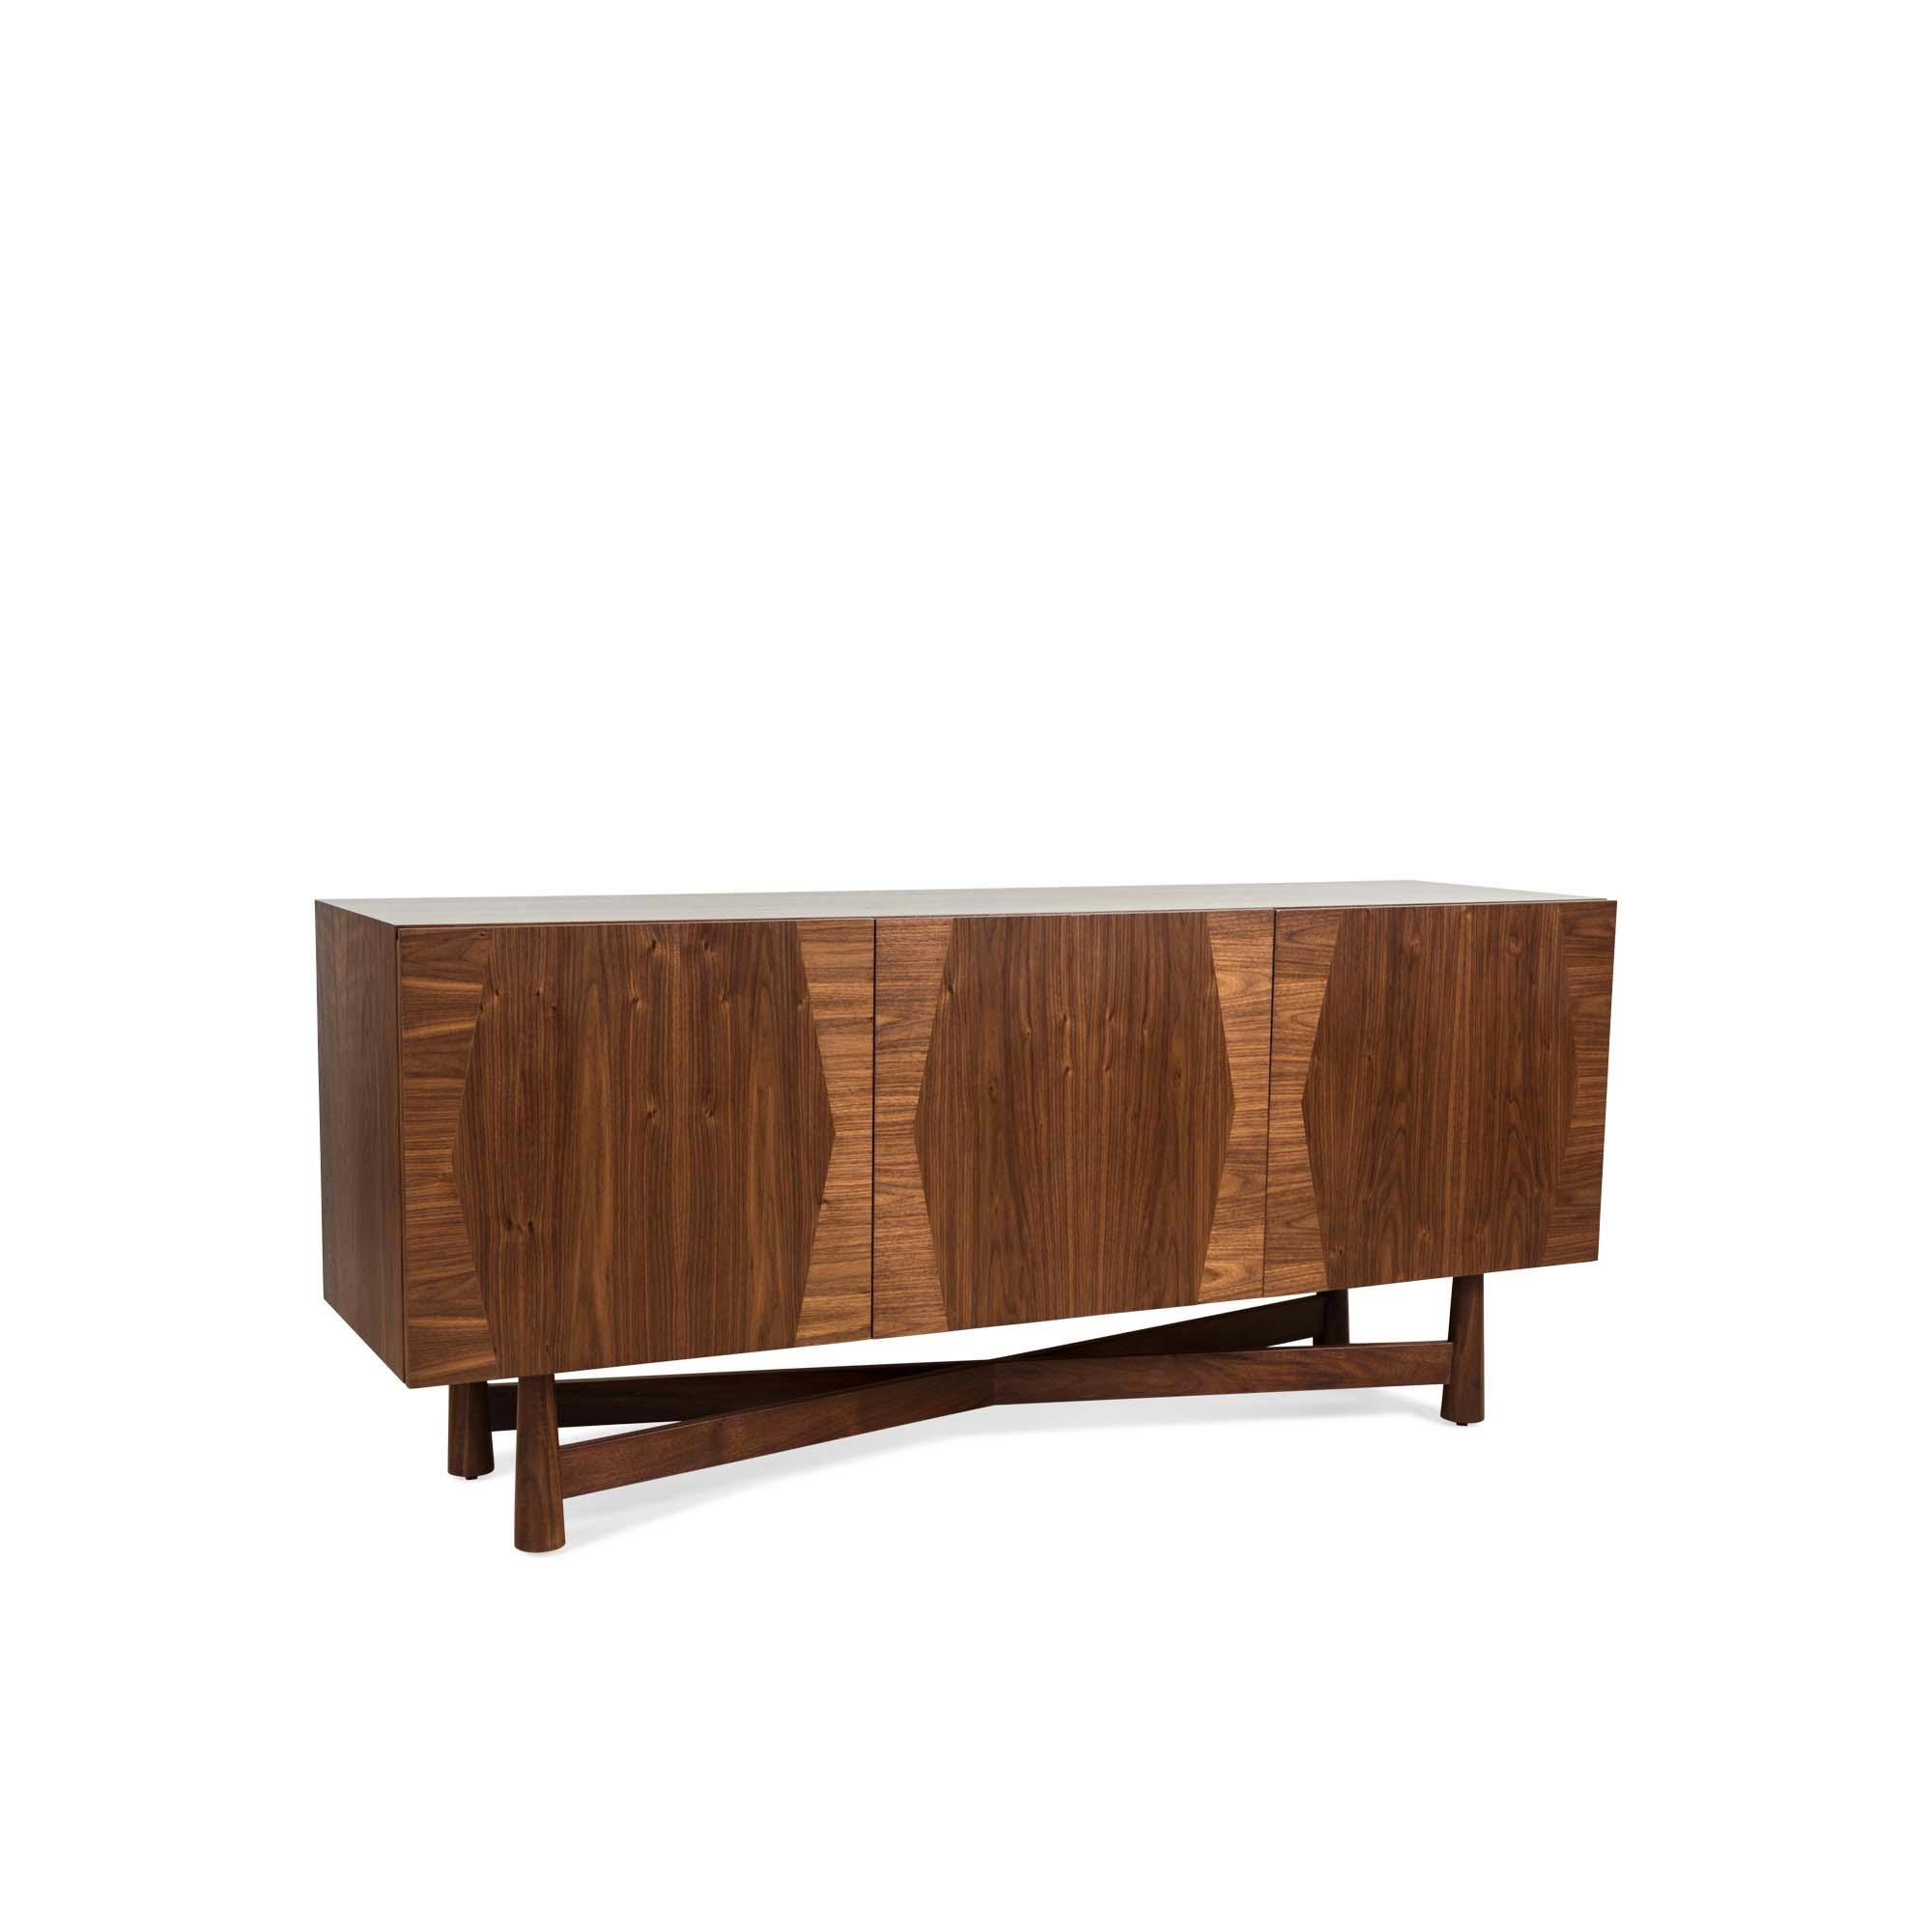 The 3-door Bronson cabinet has three drawers and three doors that feature a parquet detail on the front of the case. The cabinet can be made in American walnut or white oak. 

The Lawson-Fenning Collection is designed and handmade in Los Angeles,